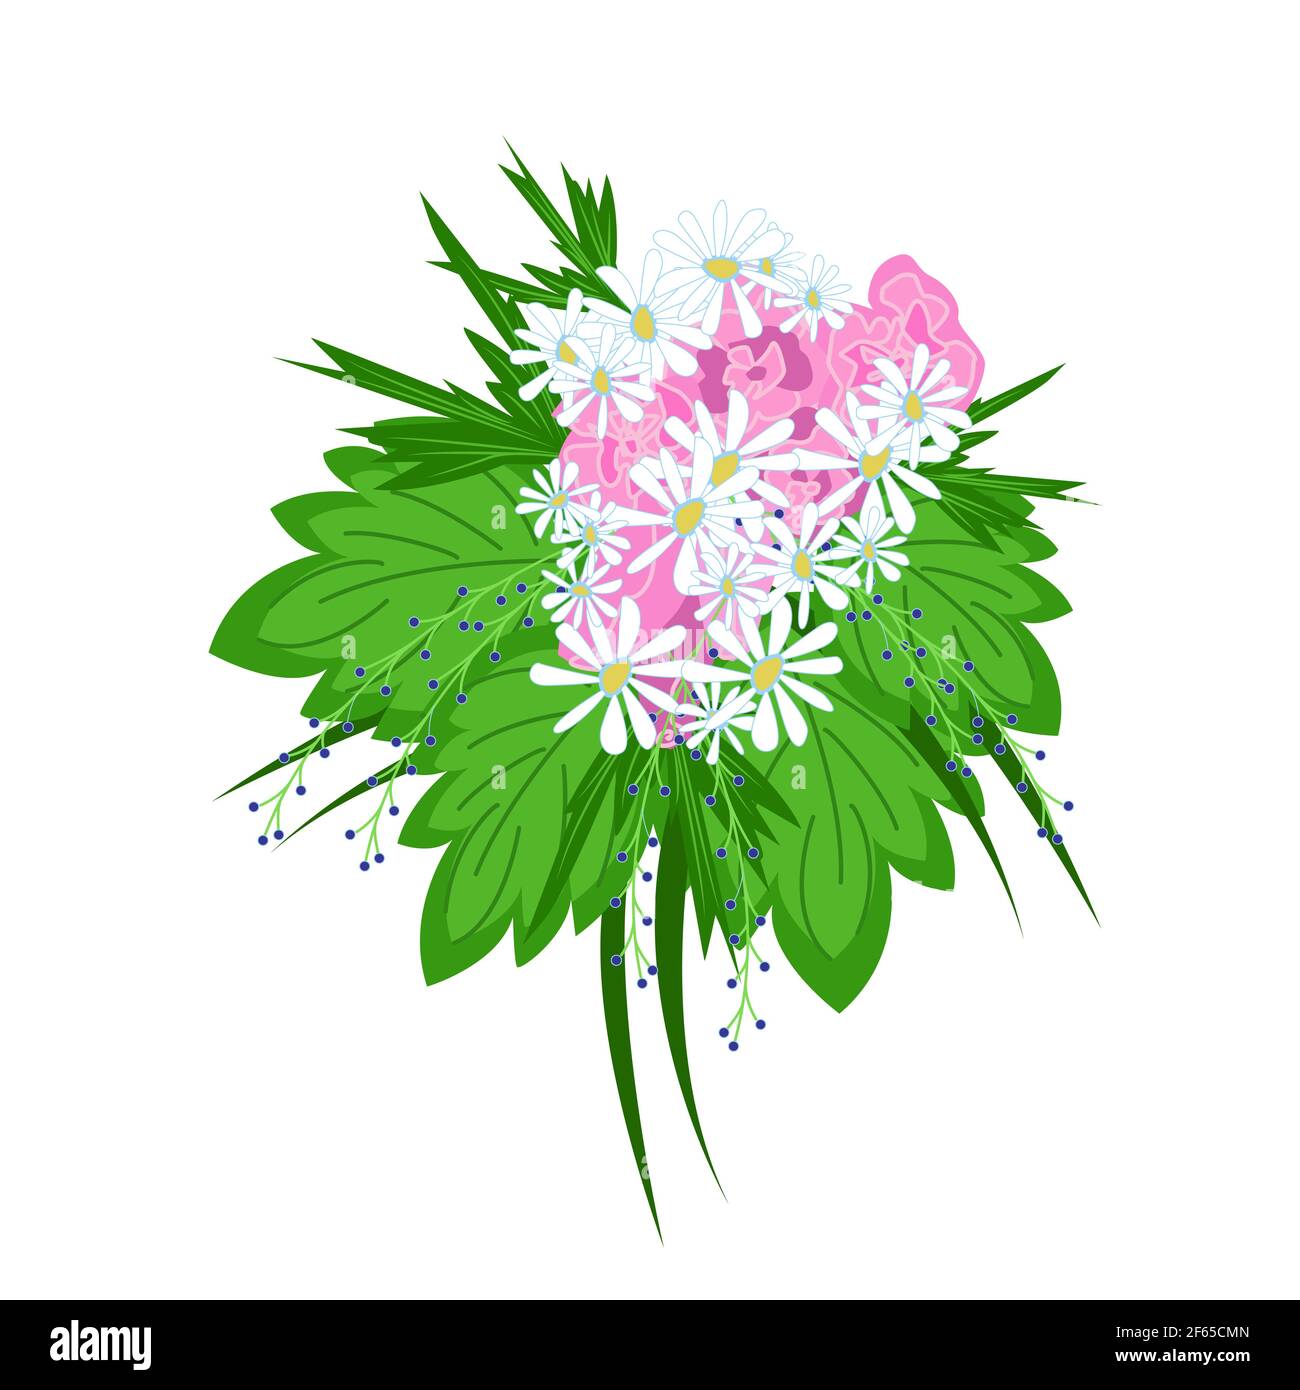 Big lush bouquet of daisies decorated with green tropical leaves, beautiful flowers as a gift, floral arrangement in flat style, vector Stock Vector